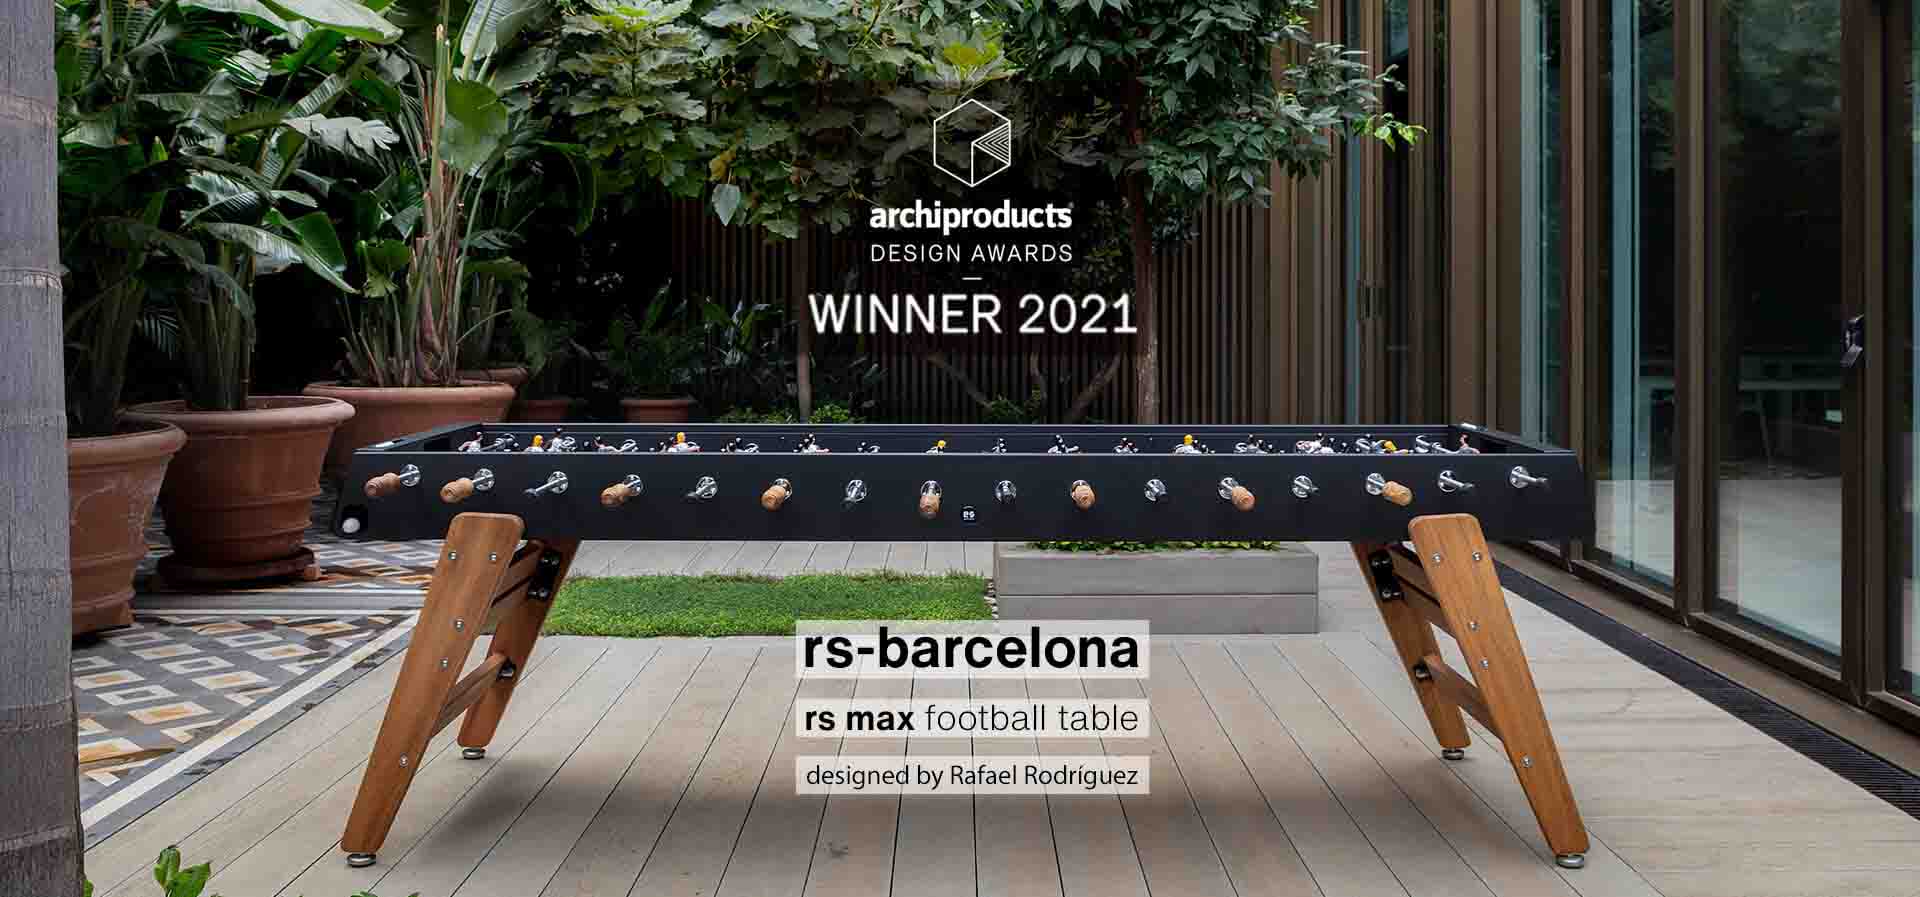 RS Barcelona RS MAx football table - archiproducts Design Award